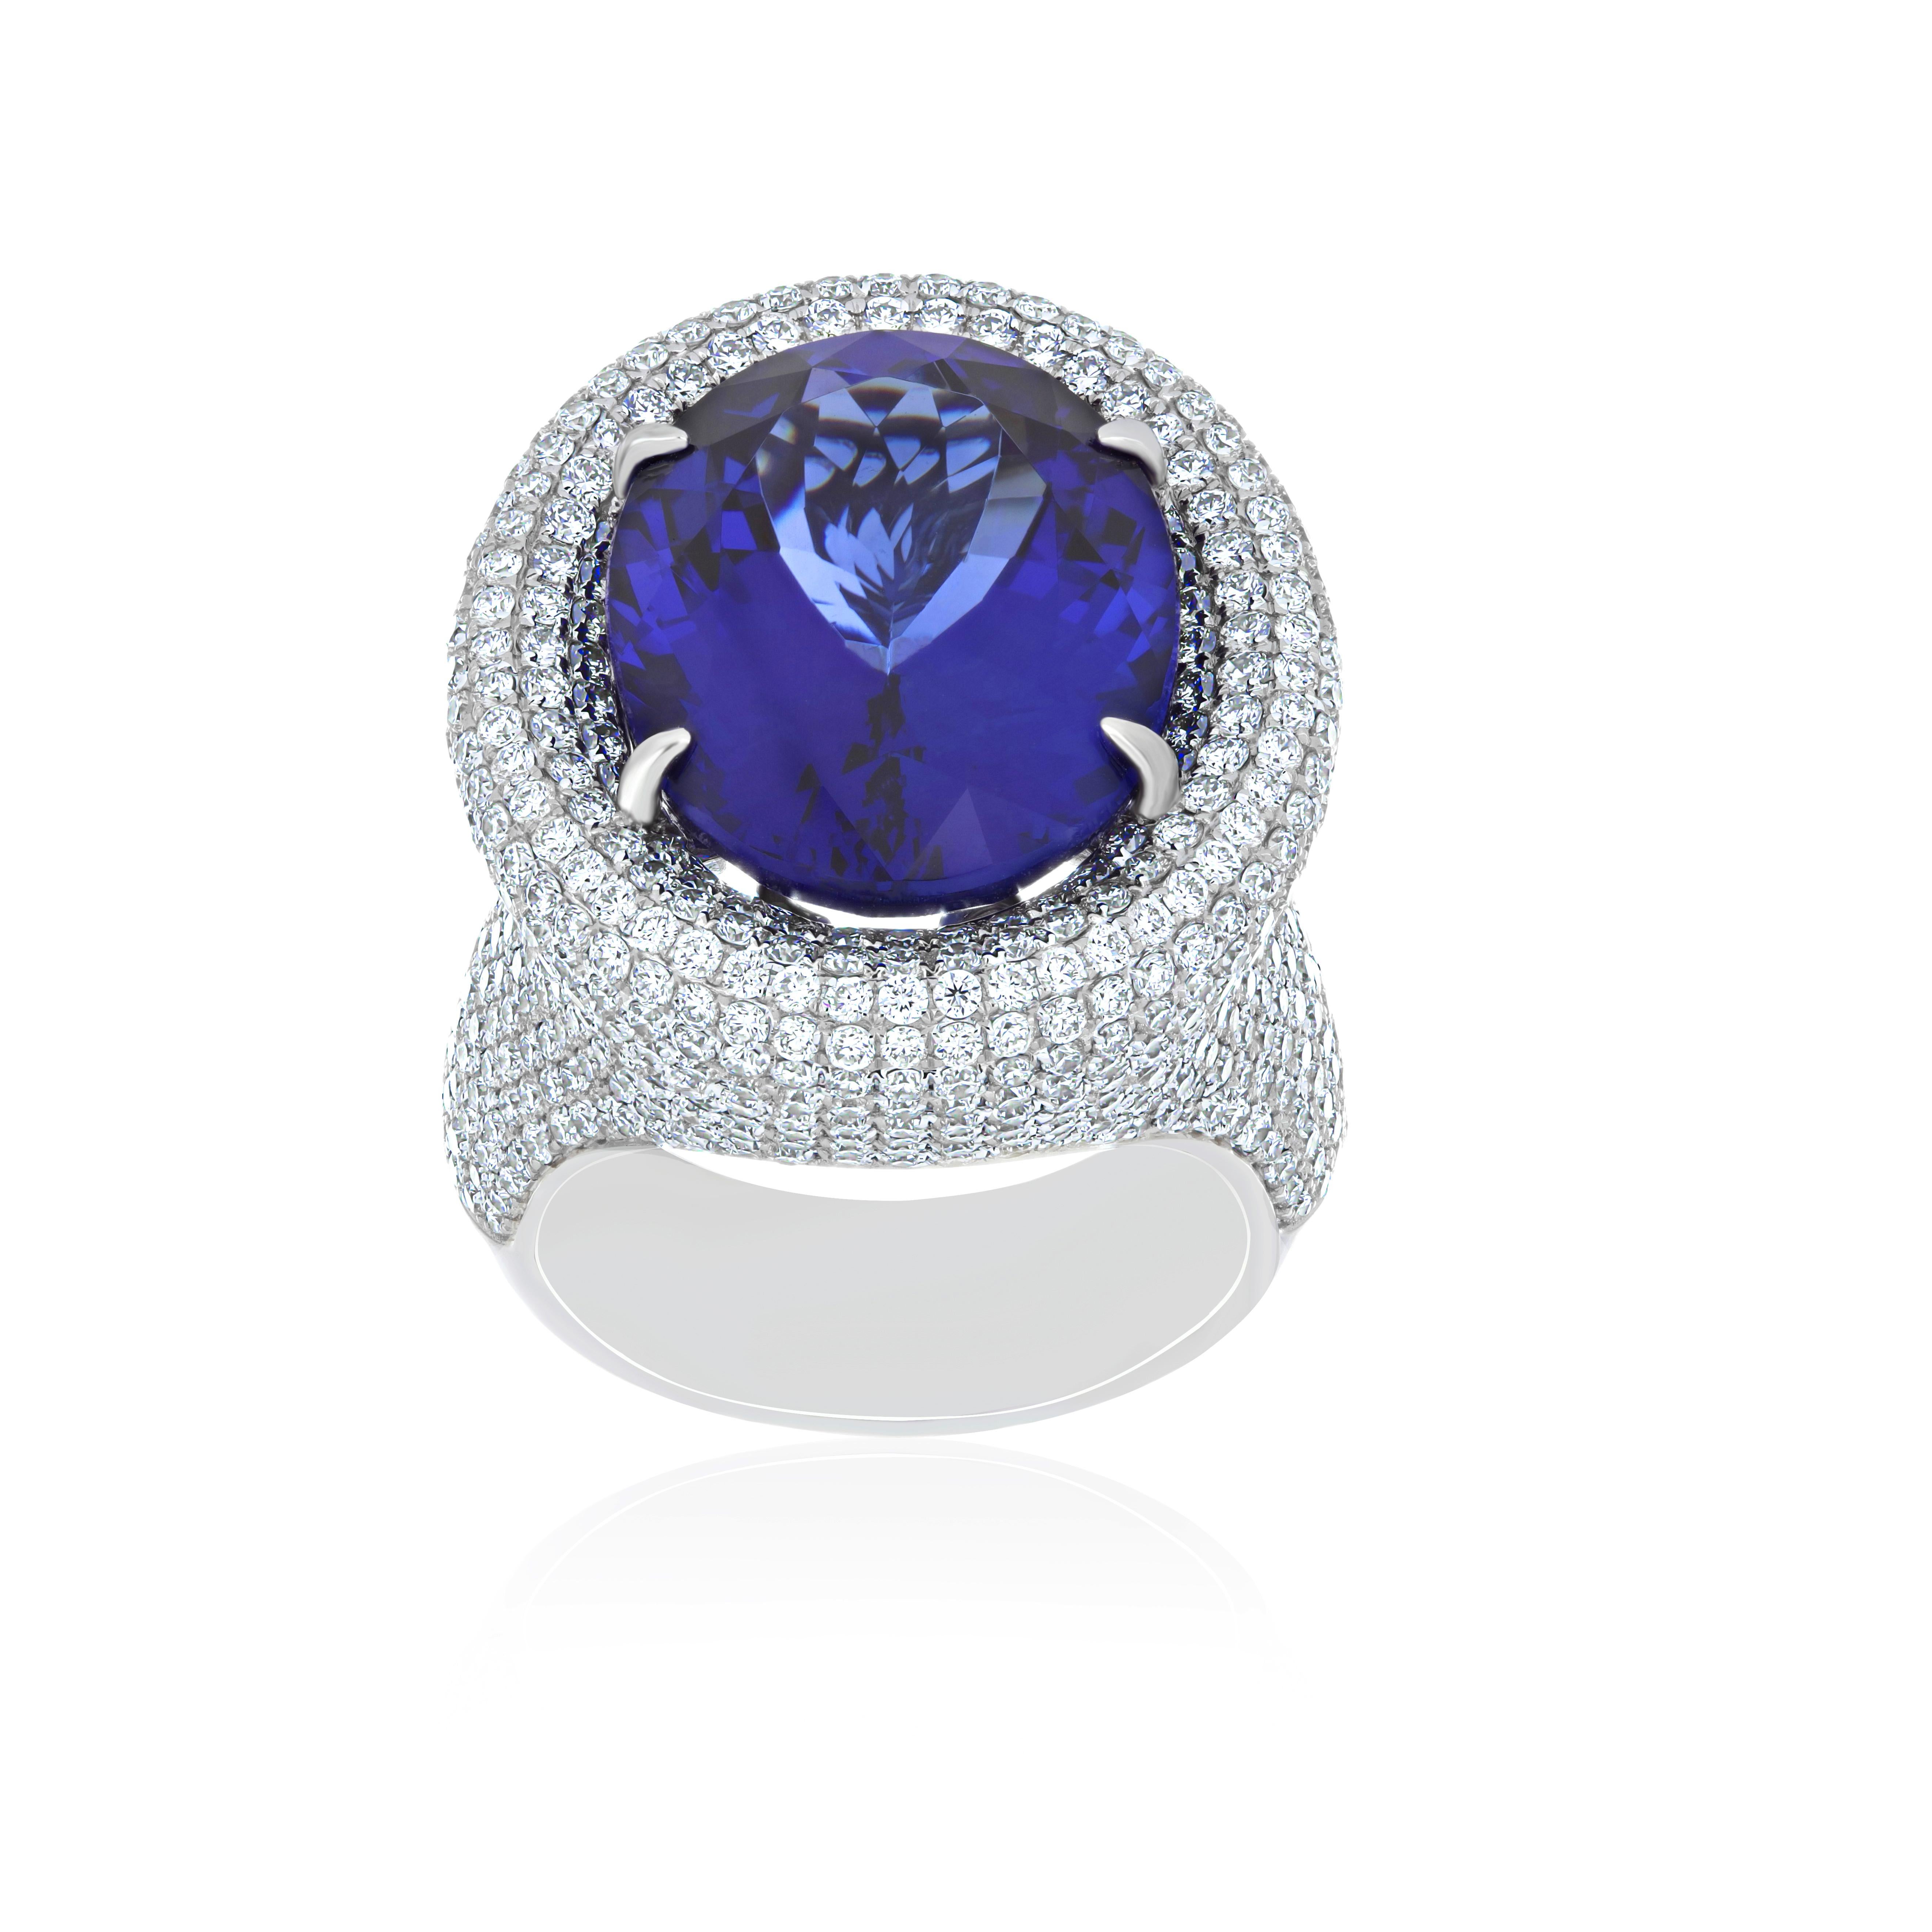 Elegant and Exquisitely detailed White Gold Ring, with a rare 16.95 Cts (approx.) Oval Shape Cut Tanzanite set in the center beautifully accented with Micro pave set Diamonds, weighing approx. 4.9 CT's (approx.). total carat weight to further